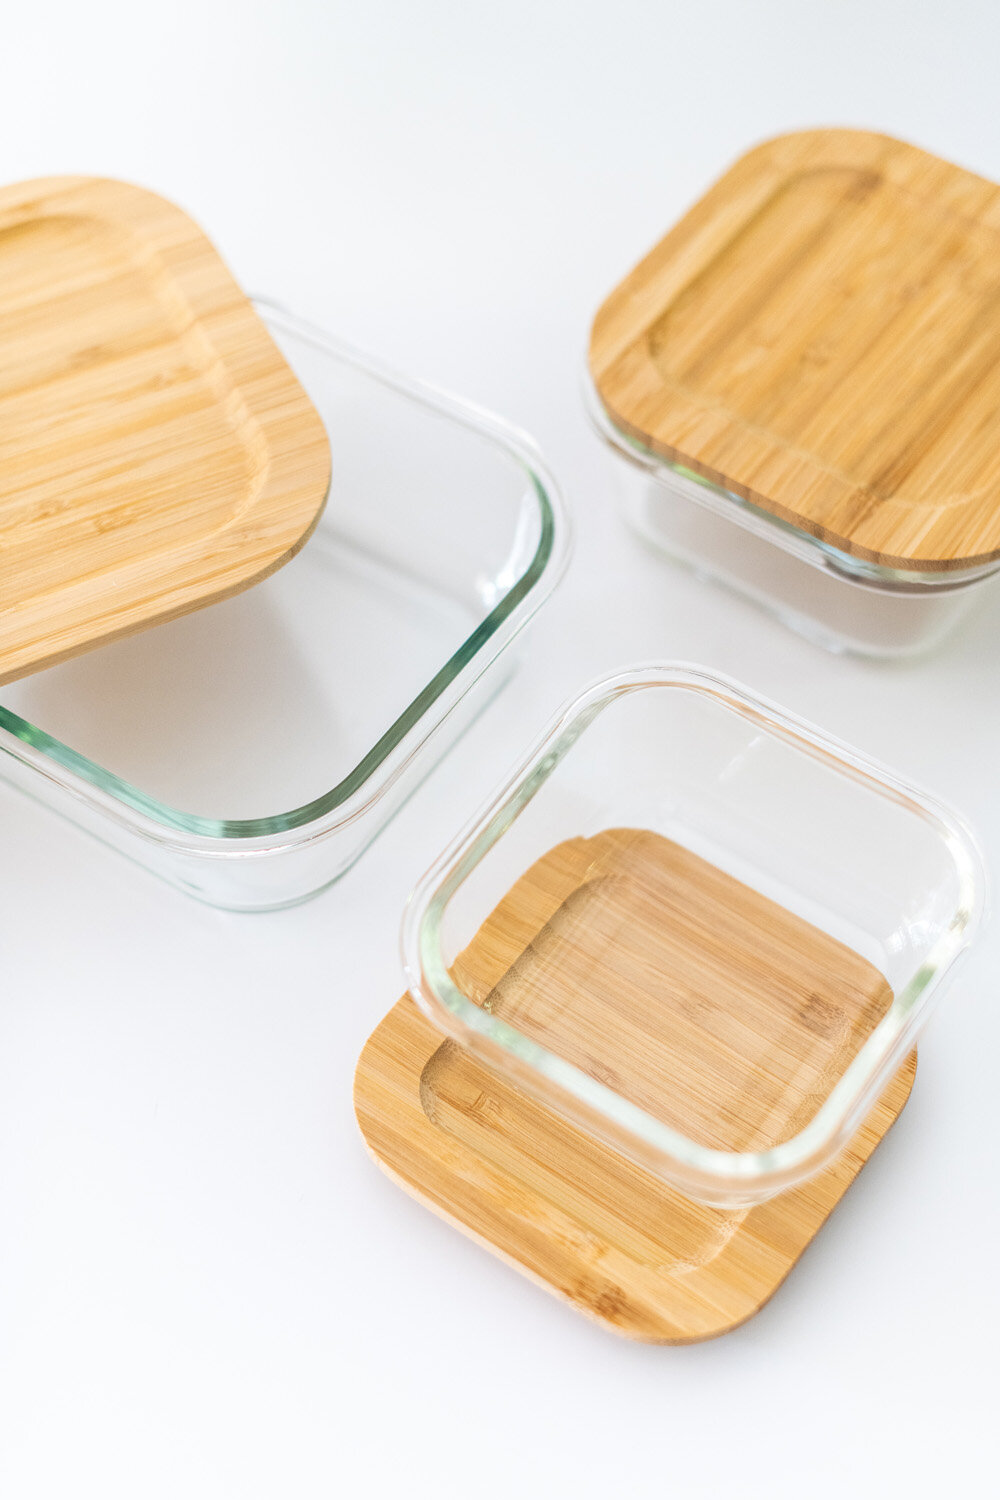 Glass Food Storage Containers, Eco-Friendly